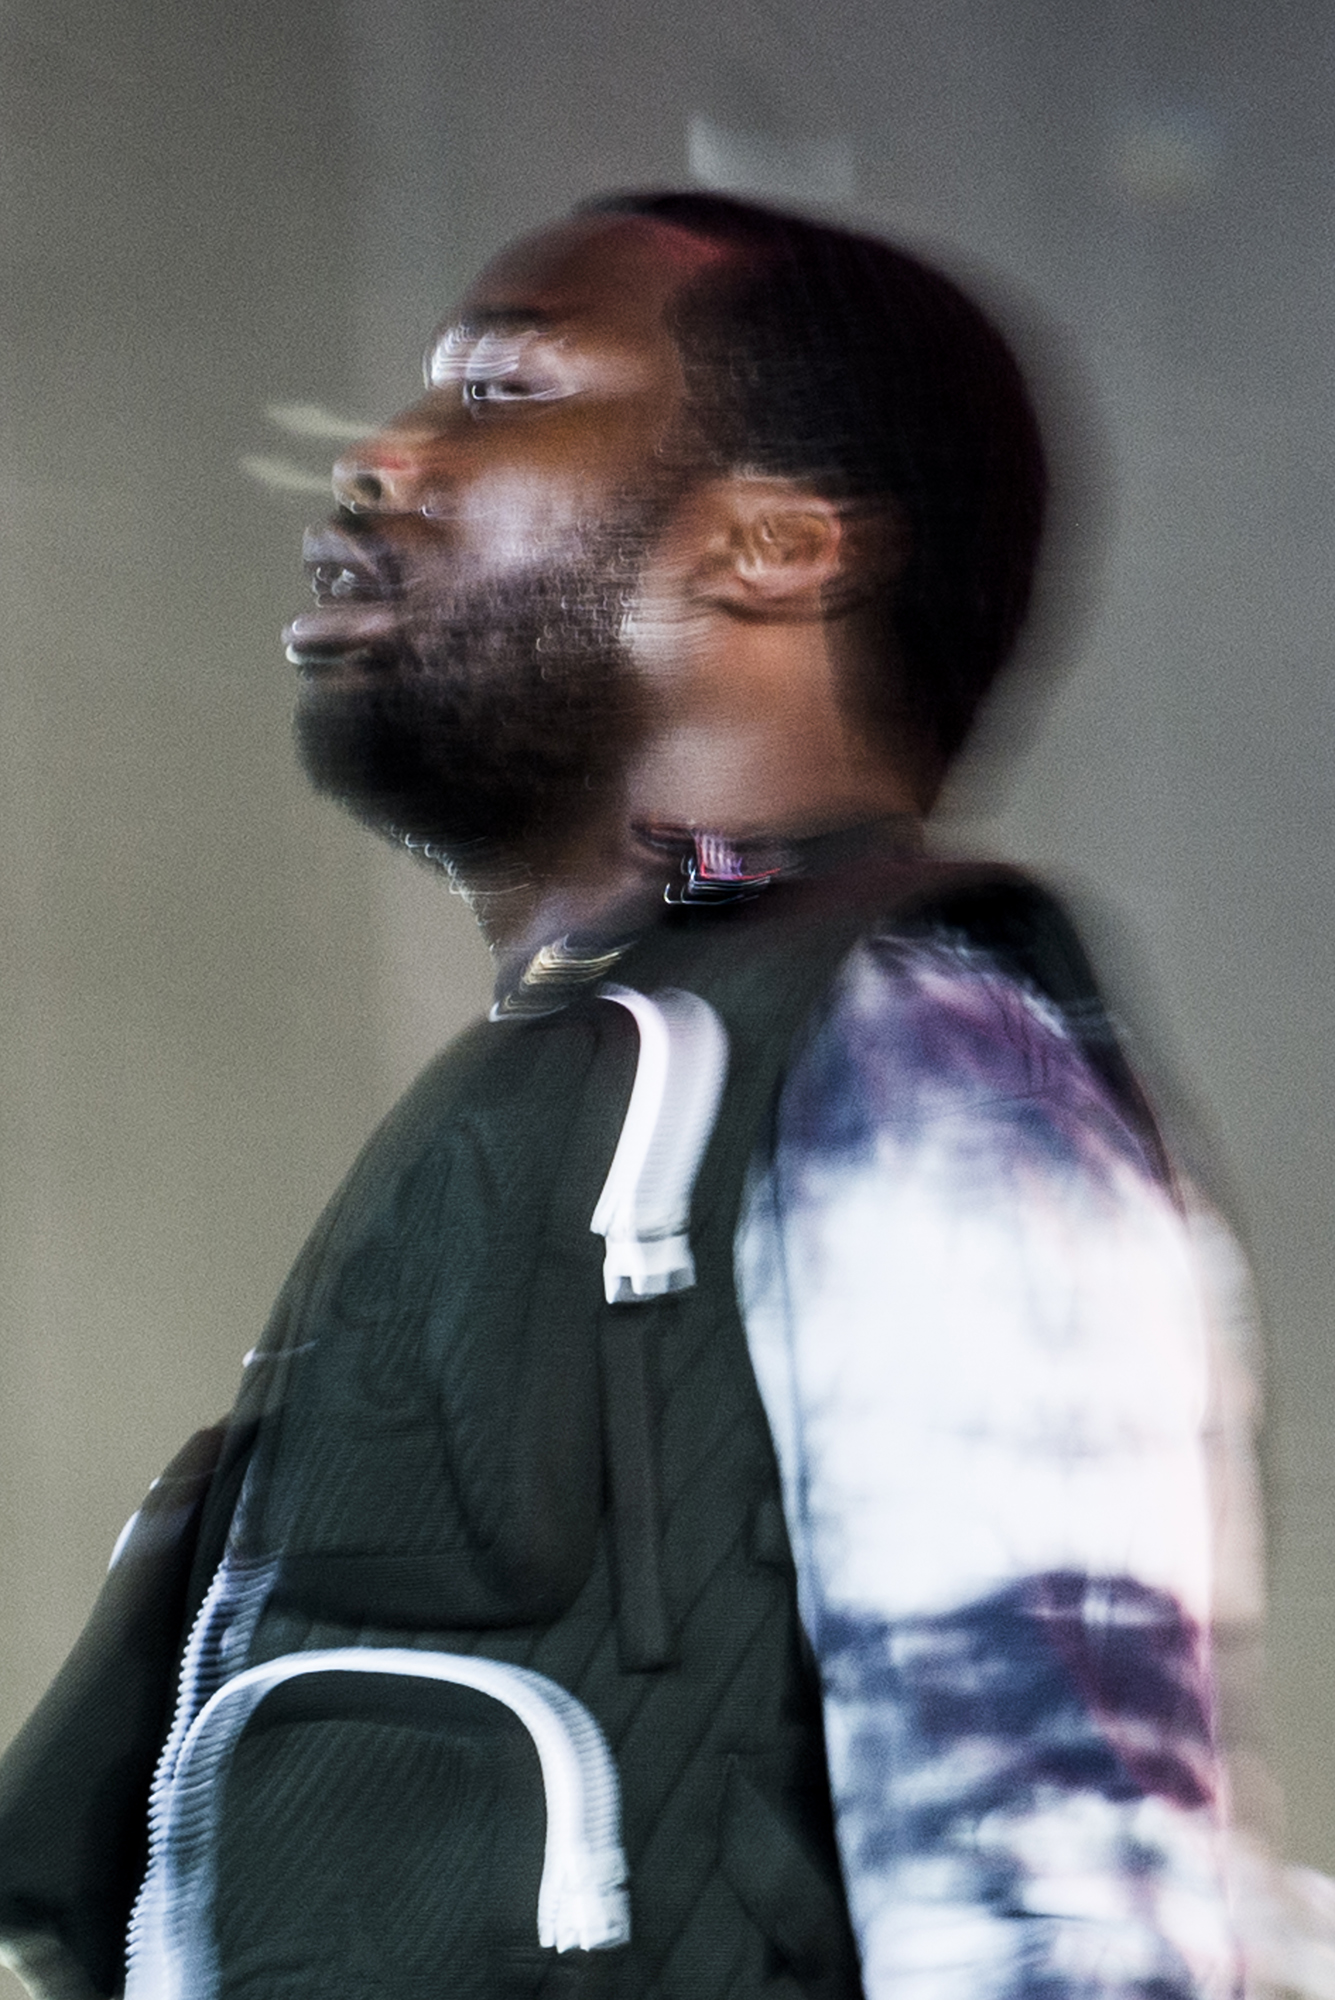 Meek Mill photographed by Aviva Klein- copyright 2021